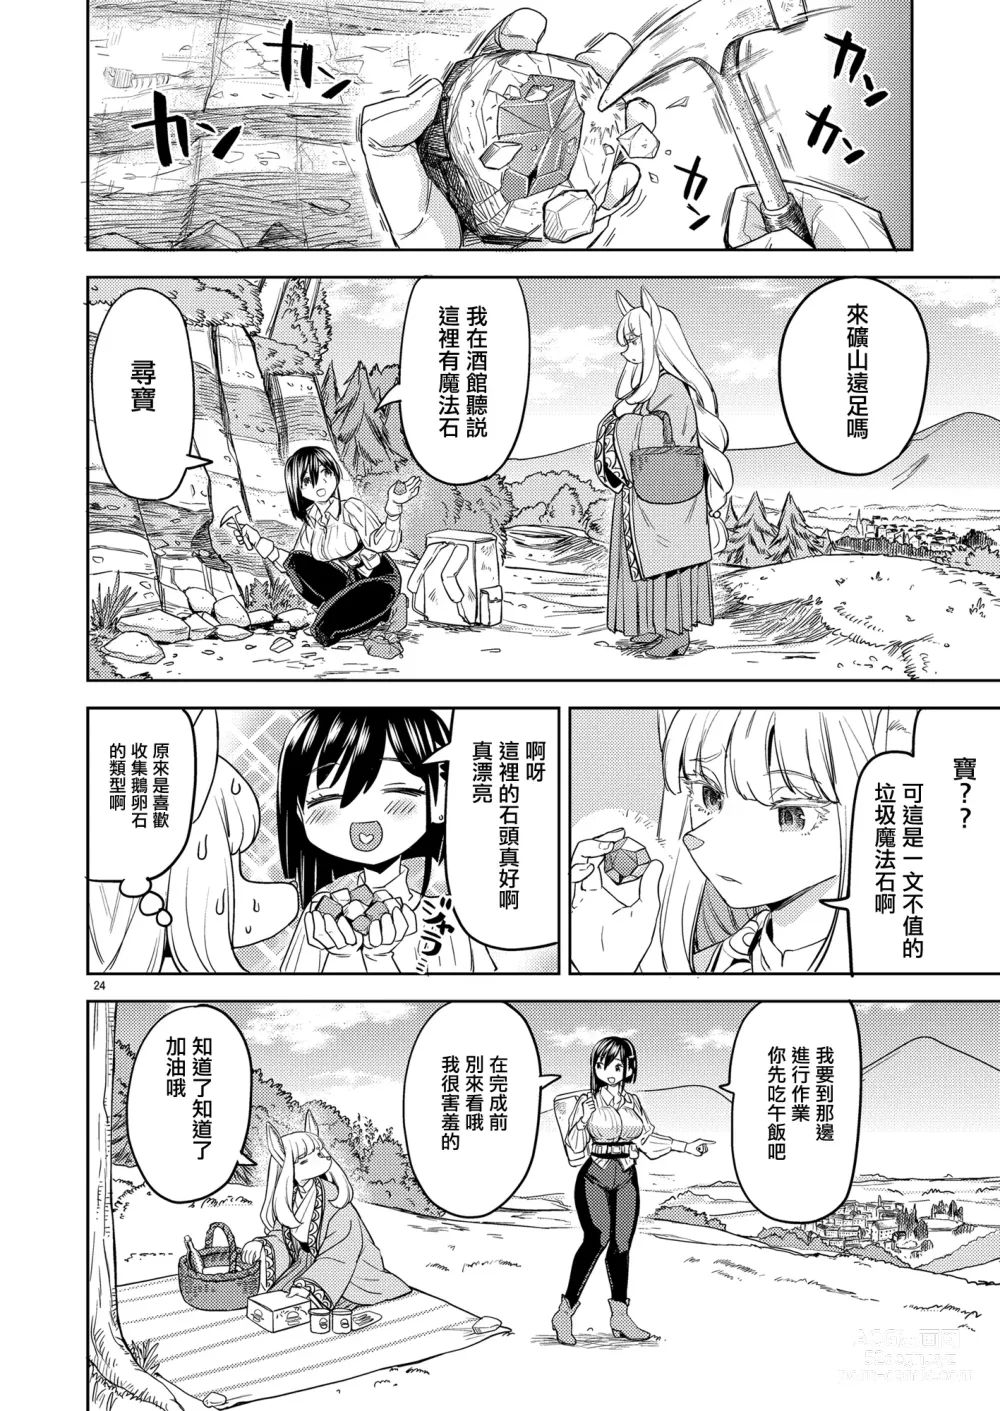 Page 28 of doujinshi 來一場蜜月旅行